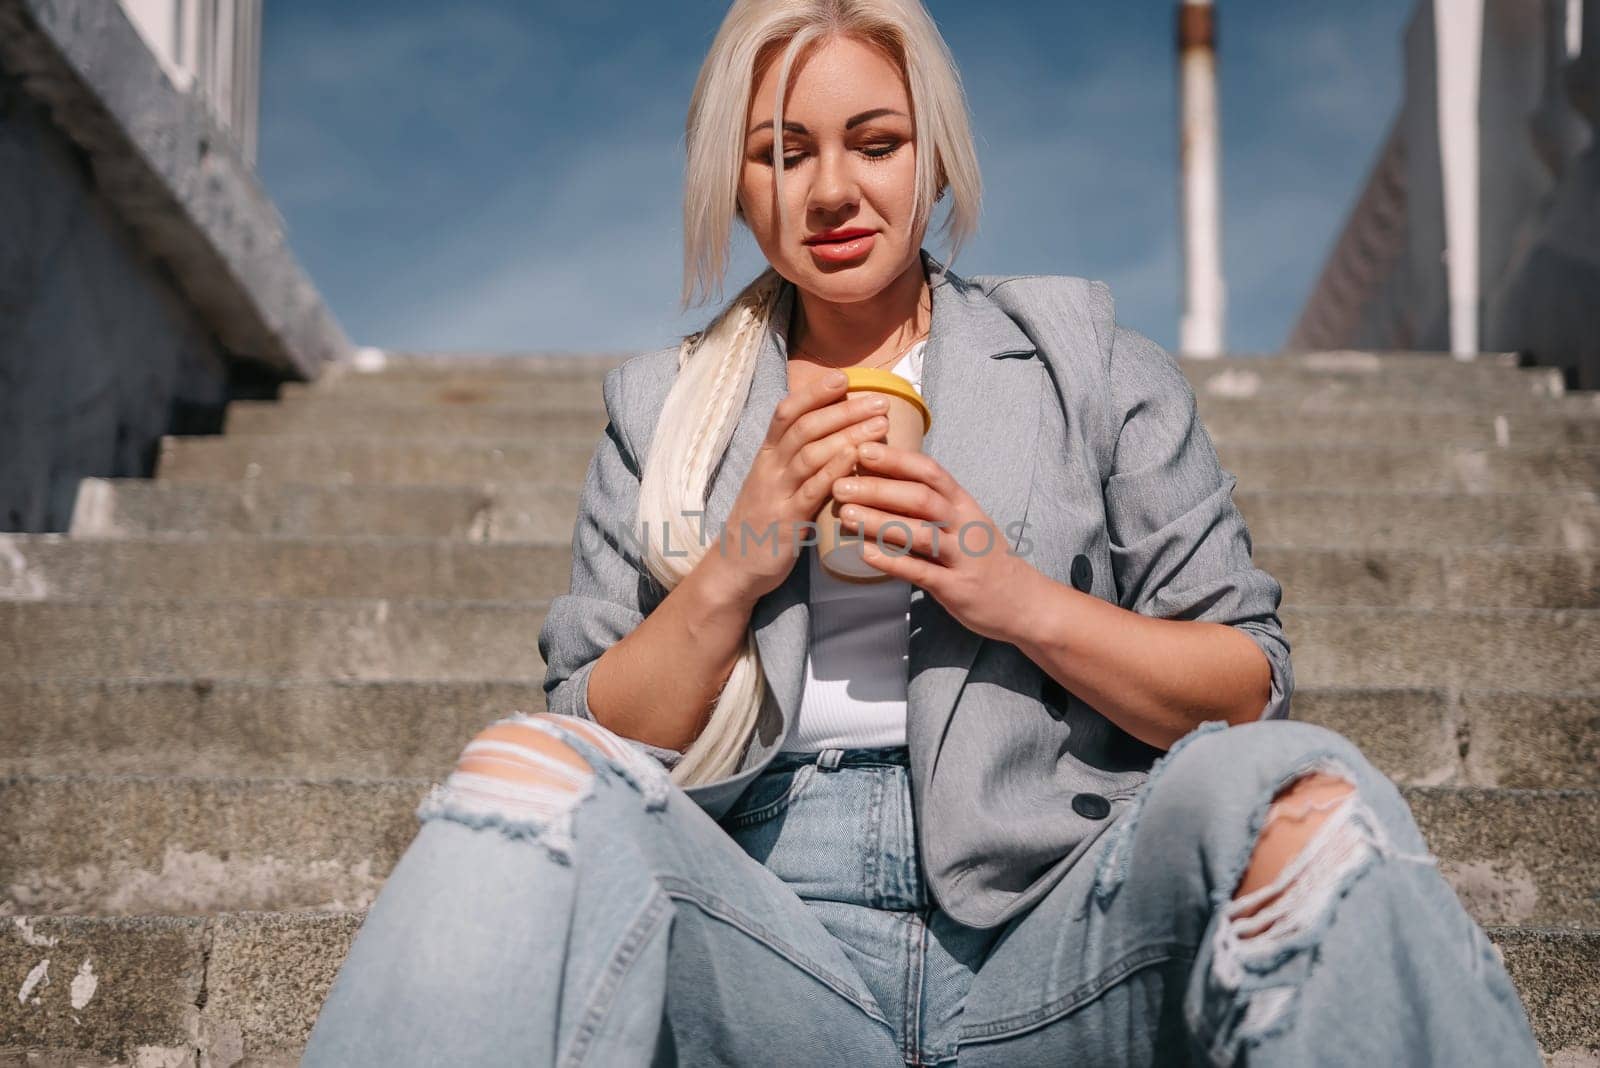 A woman in a gray jacket and jeans sits on a set of stairs with a cup in her hand